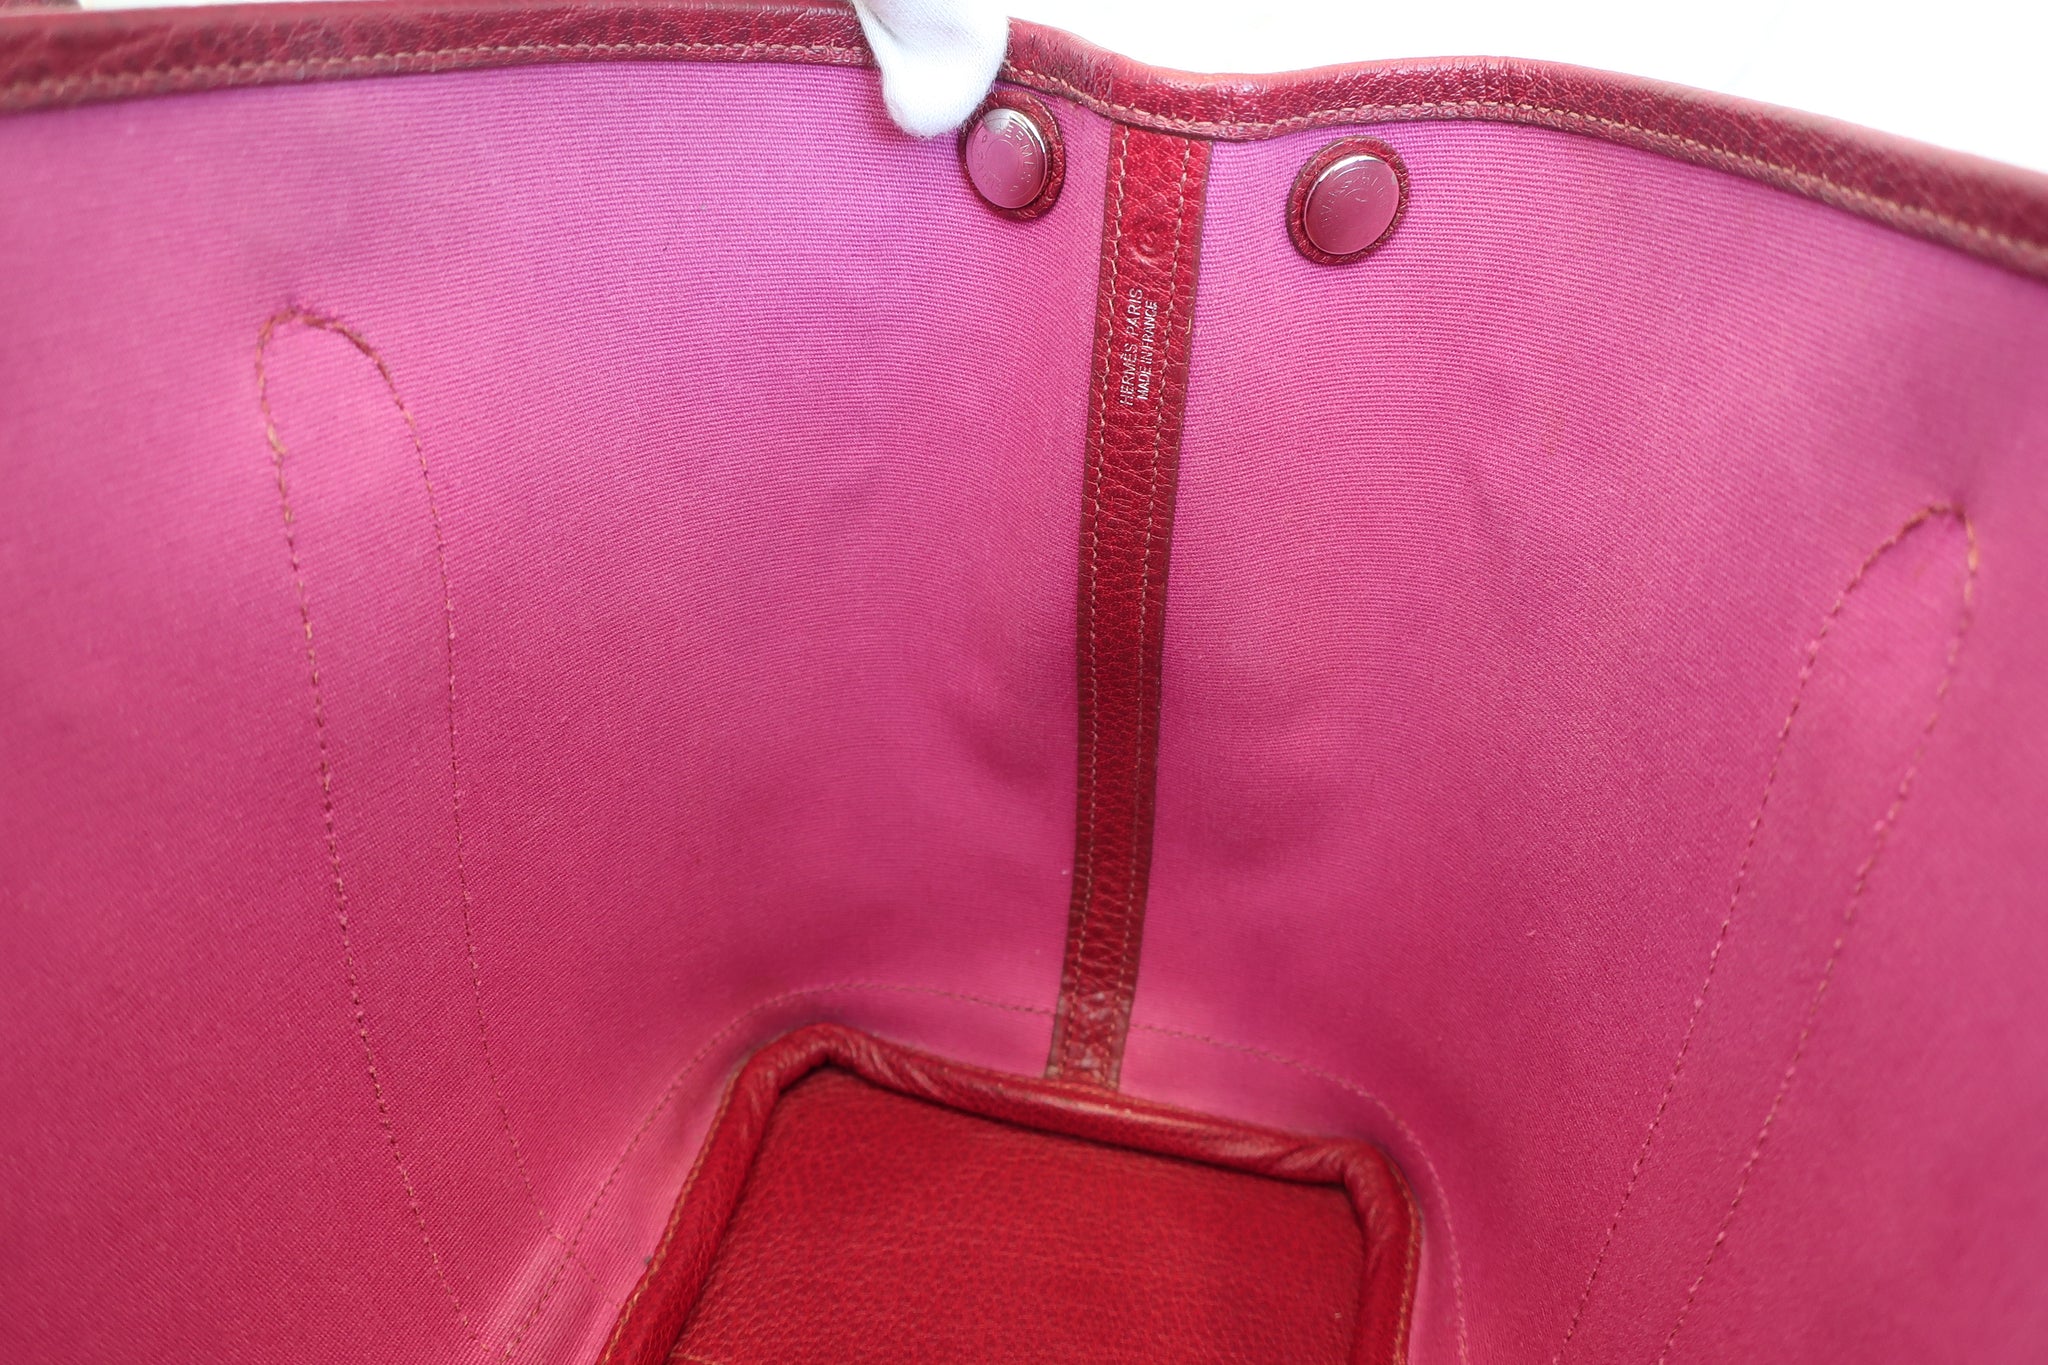 Garden party leather handbag Hermès Pink in Leather - 16822151